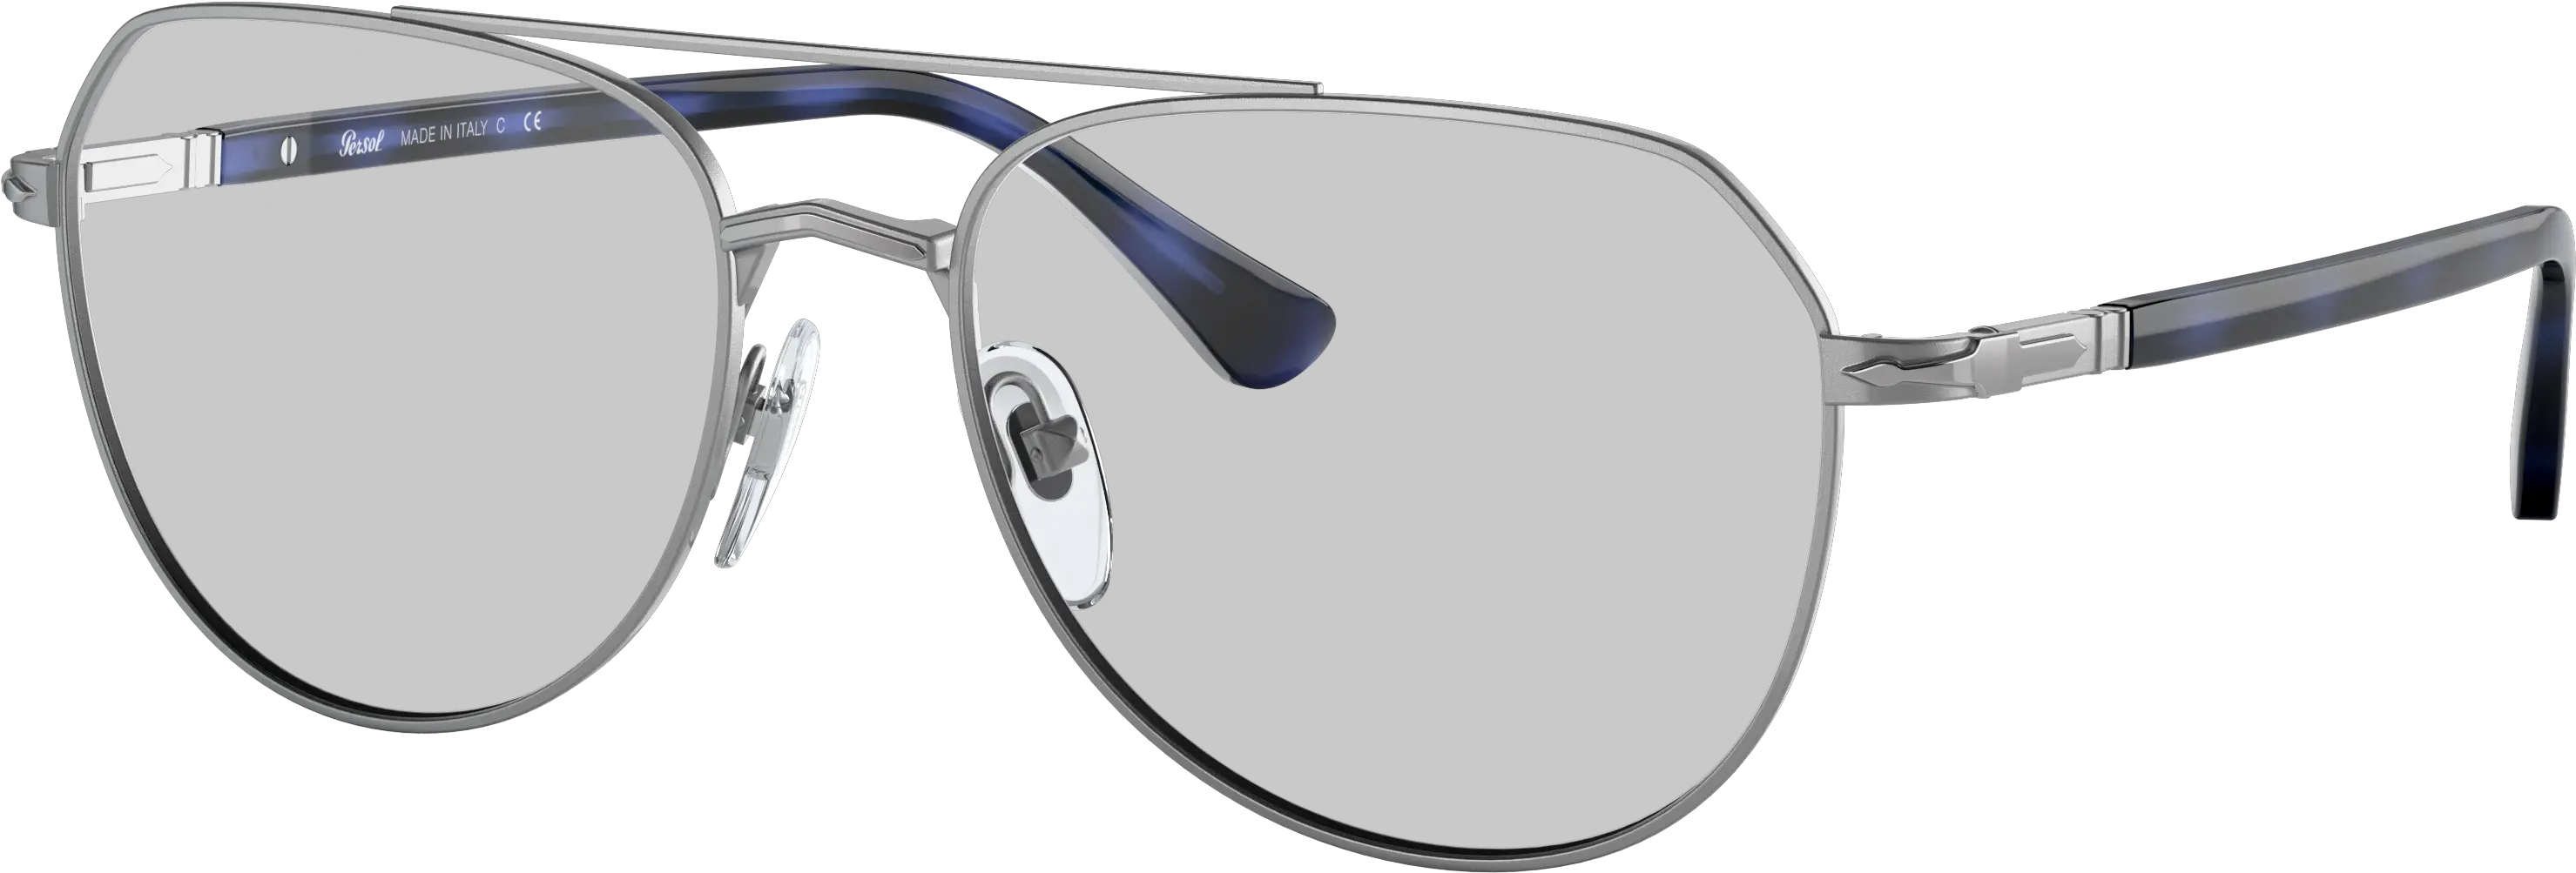 Try On The Persol Po2479v At Glassescom Full Rim Png Silhouette Rimless 7581 Titan Minimal Art The Icon